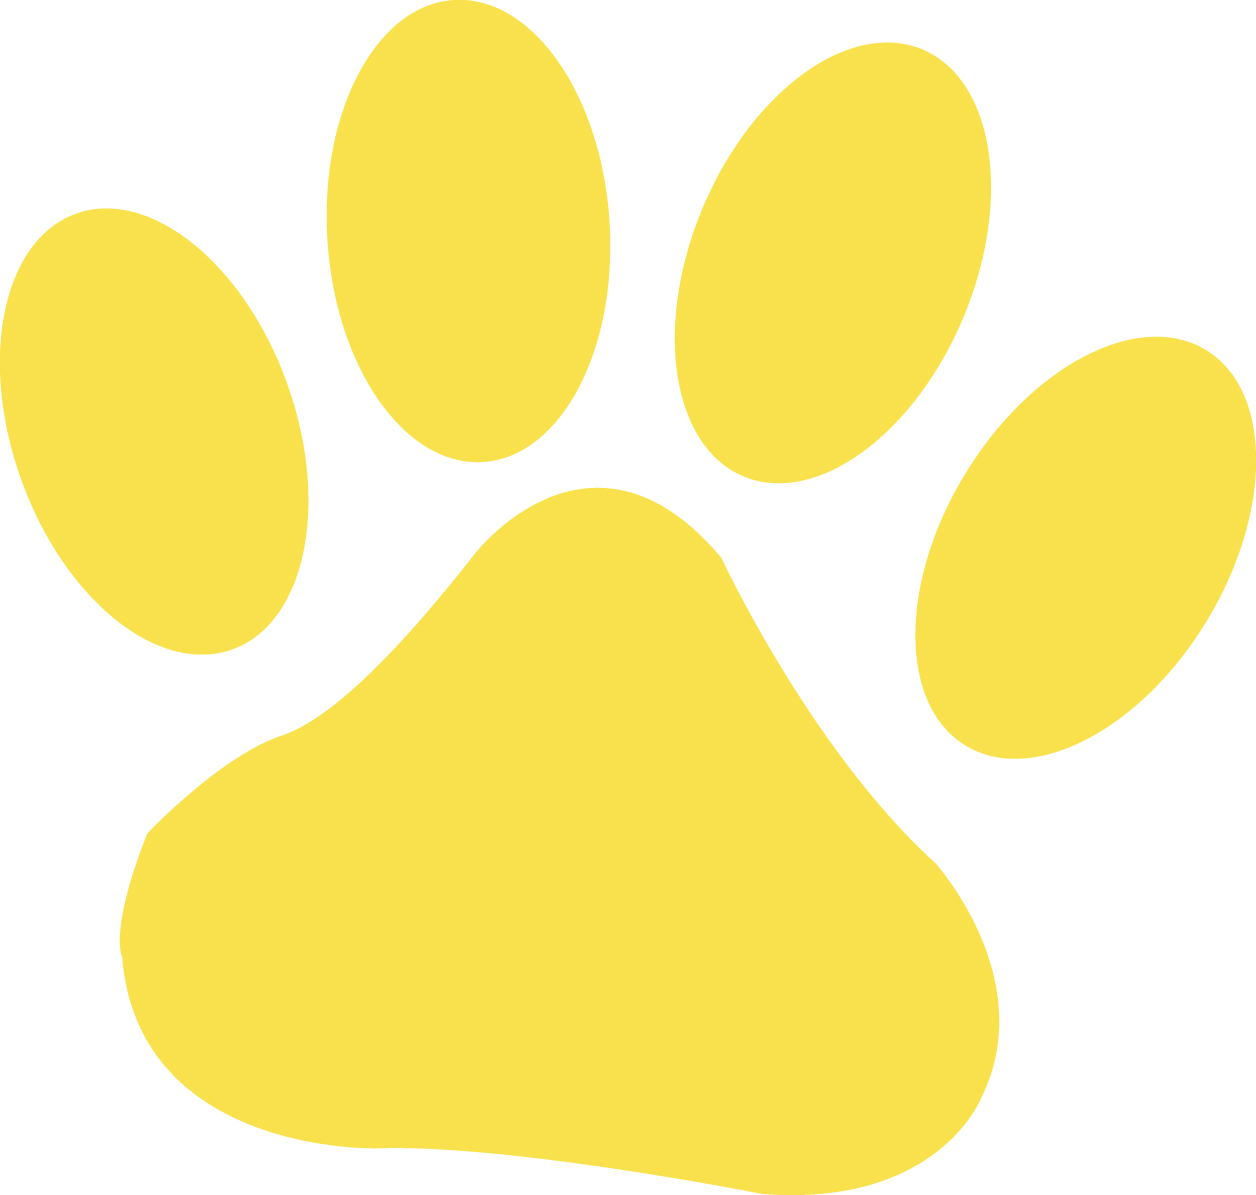 Lion Paw Print Outline - Clipart library